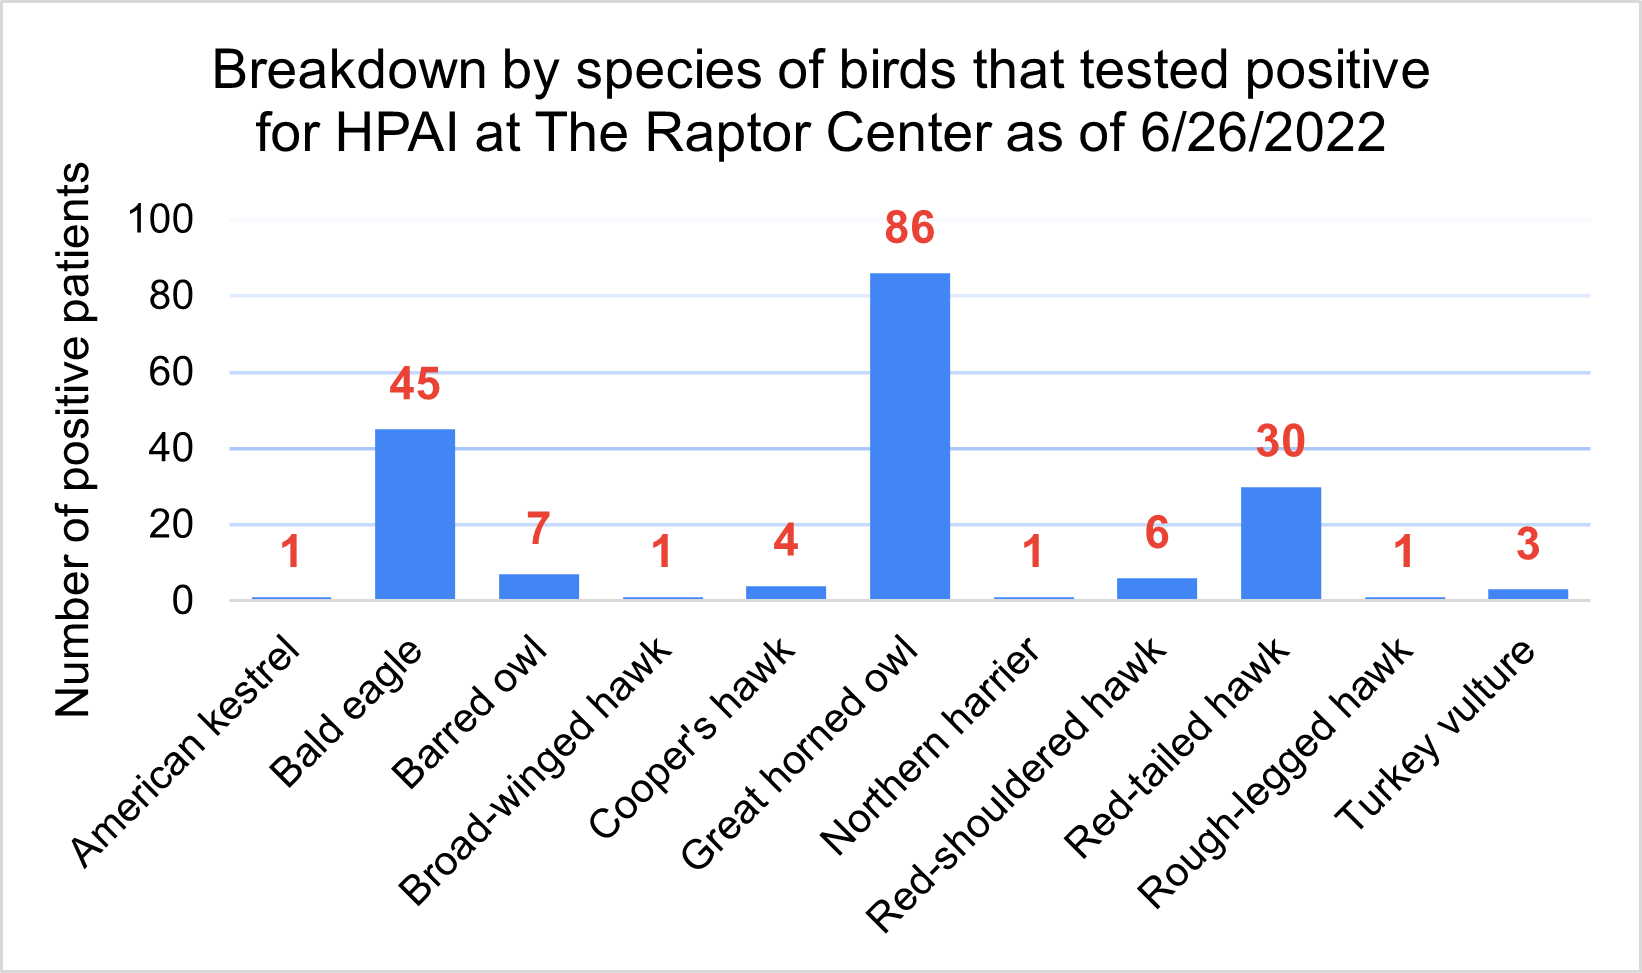 Bar chart showing number of positive HPAI patients by species at The Raptor Center